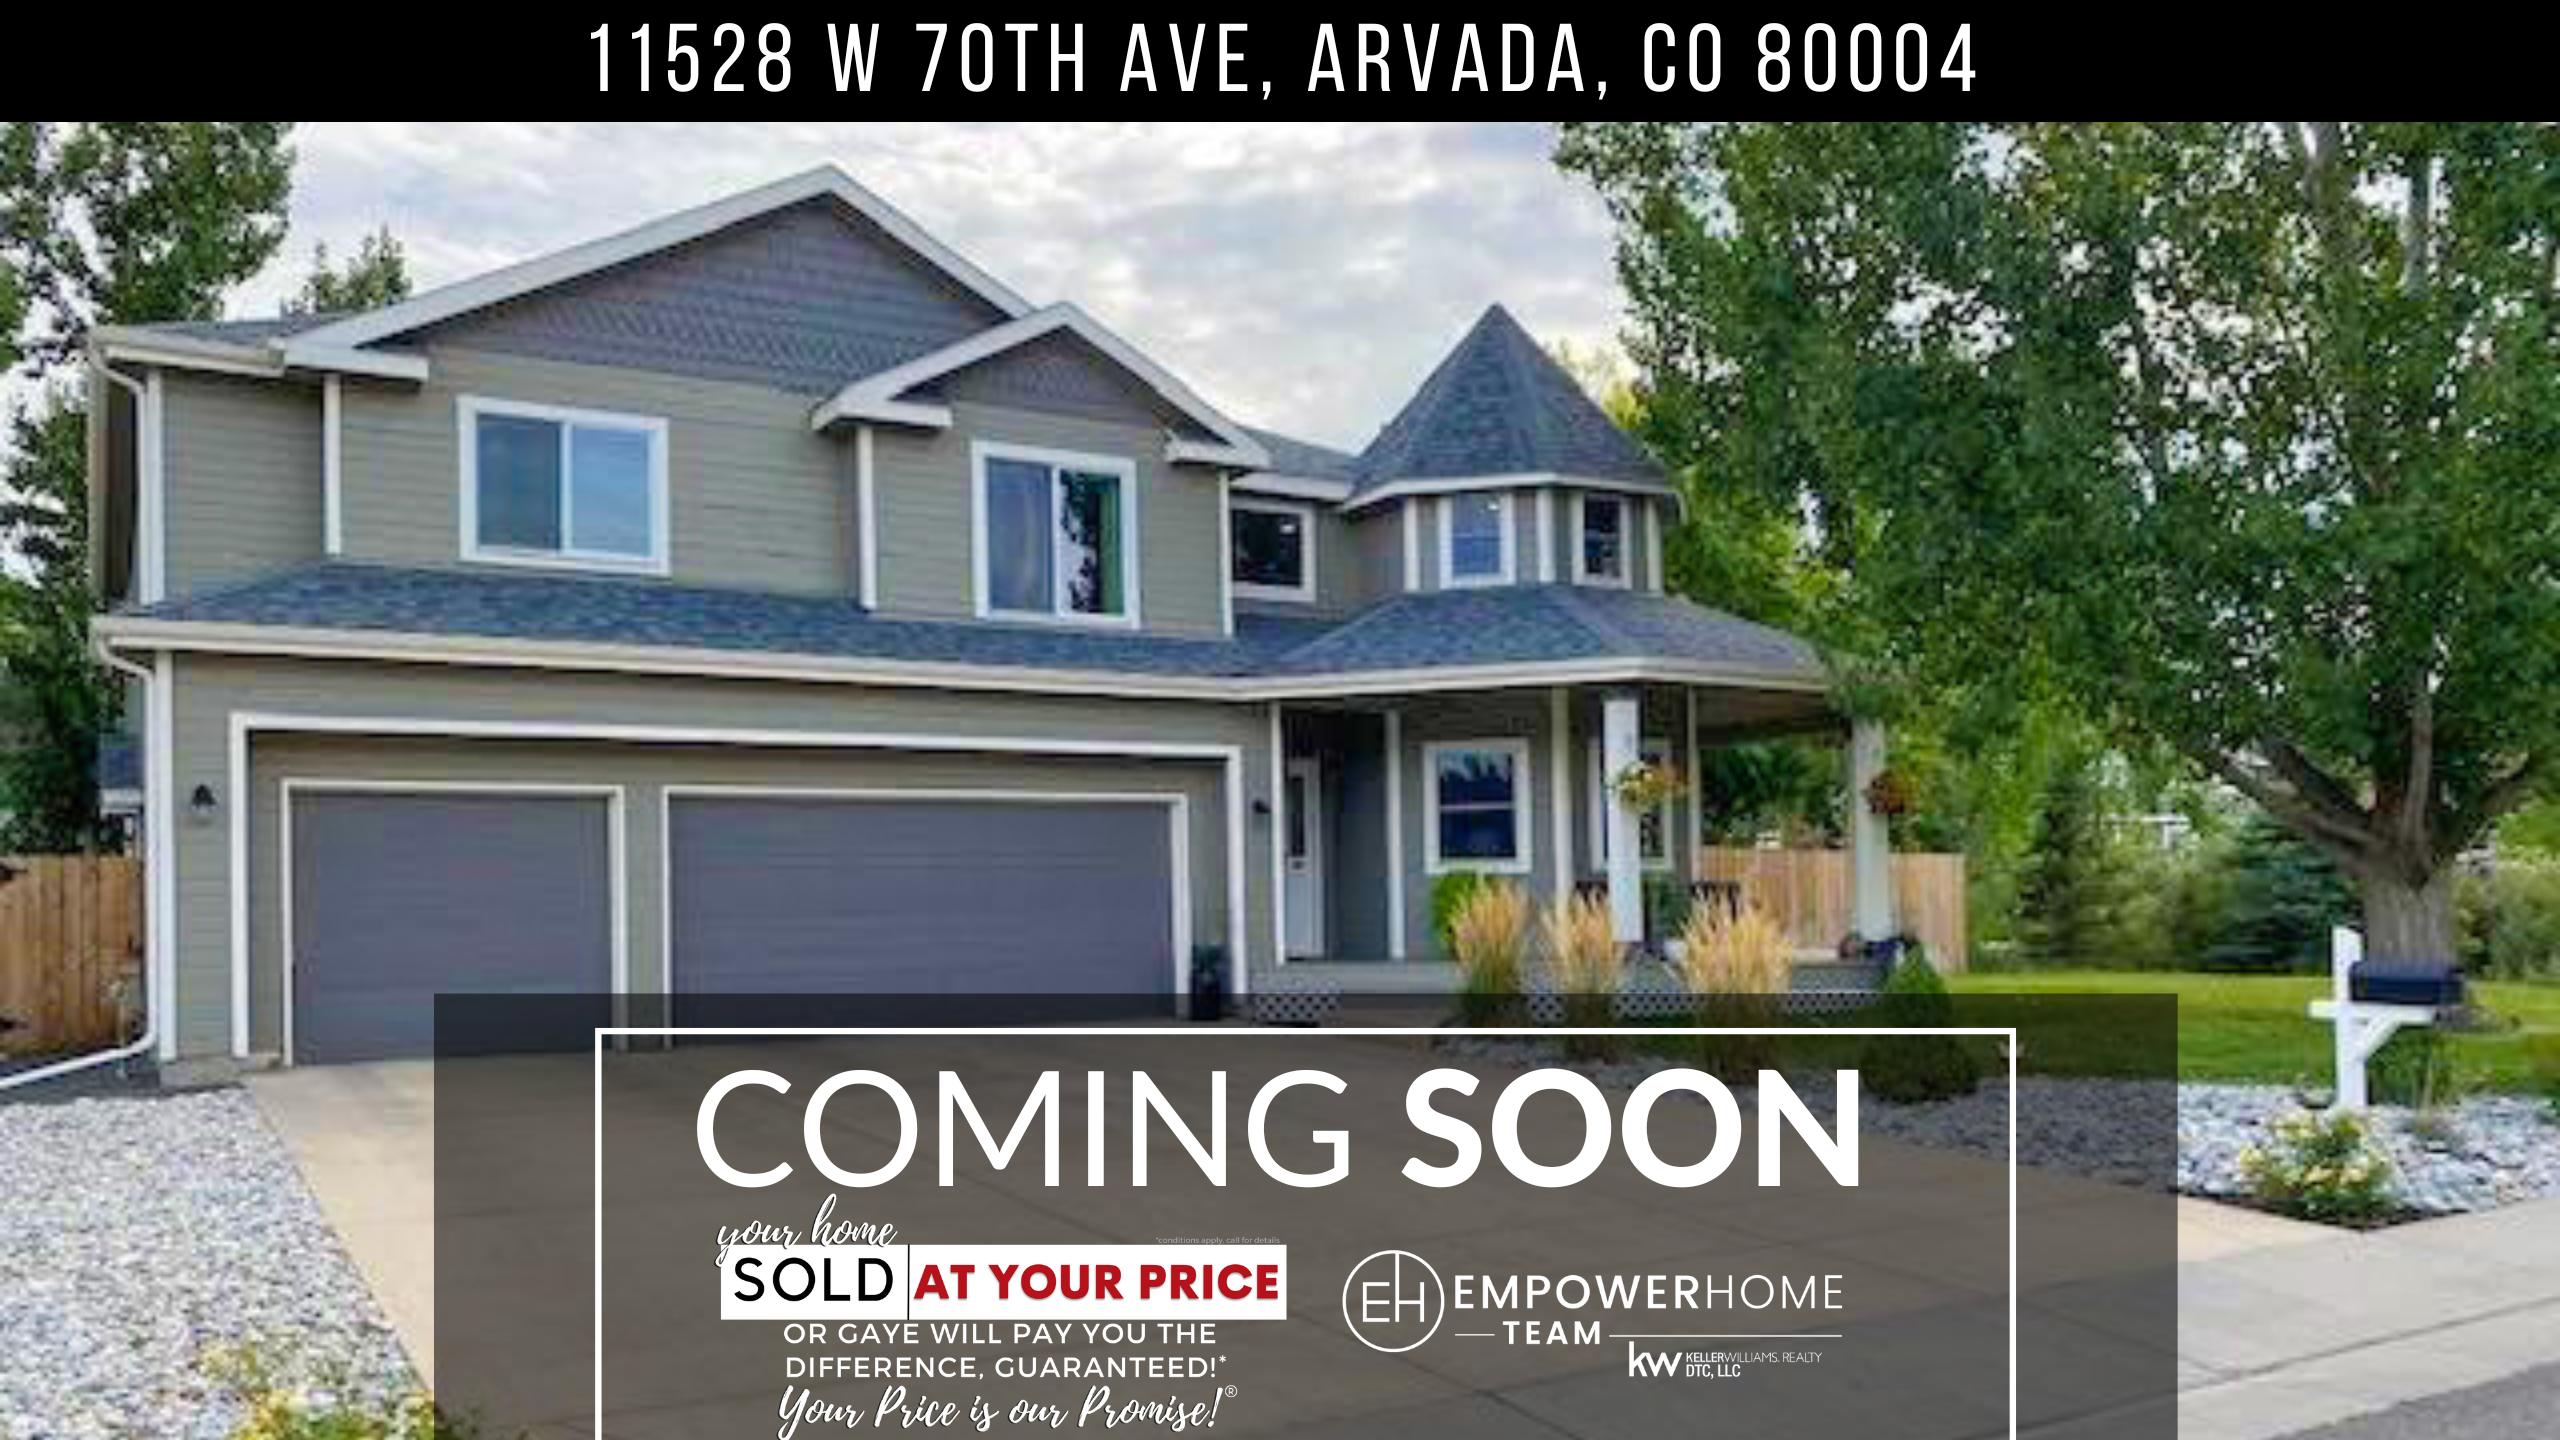 11528 W 70th Ave, Arvada, CO 80004